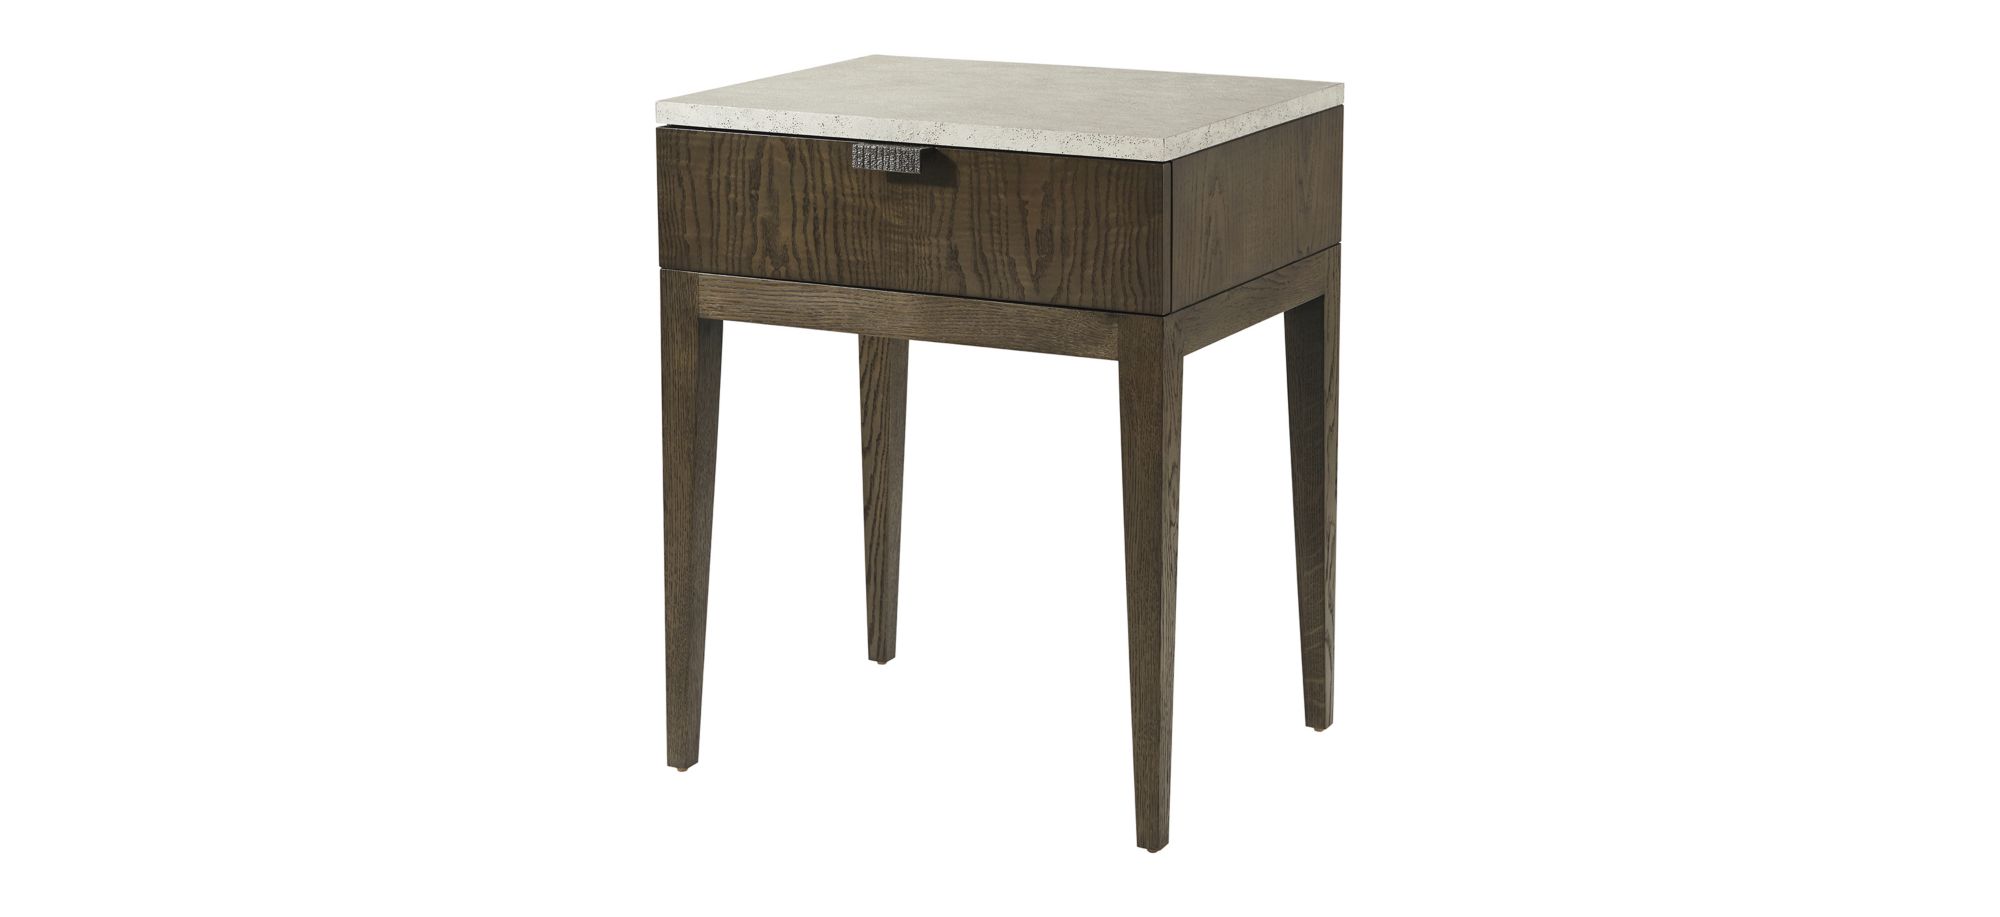 Catalina Single Drawer Nightstand in Earth by Theodore Alexander